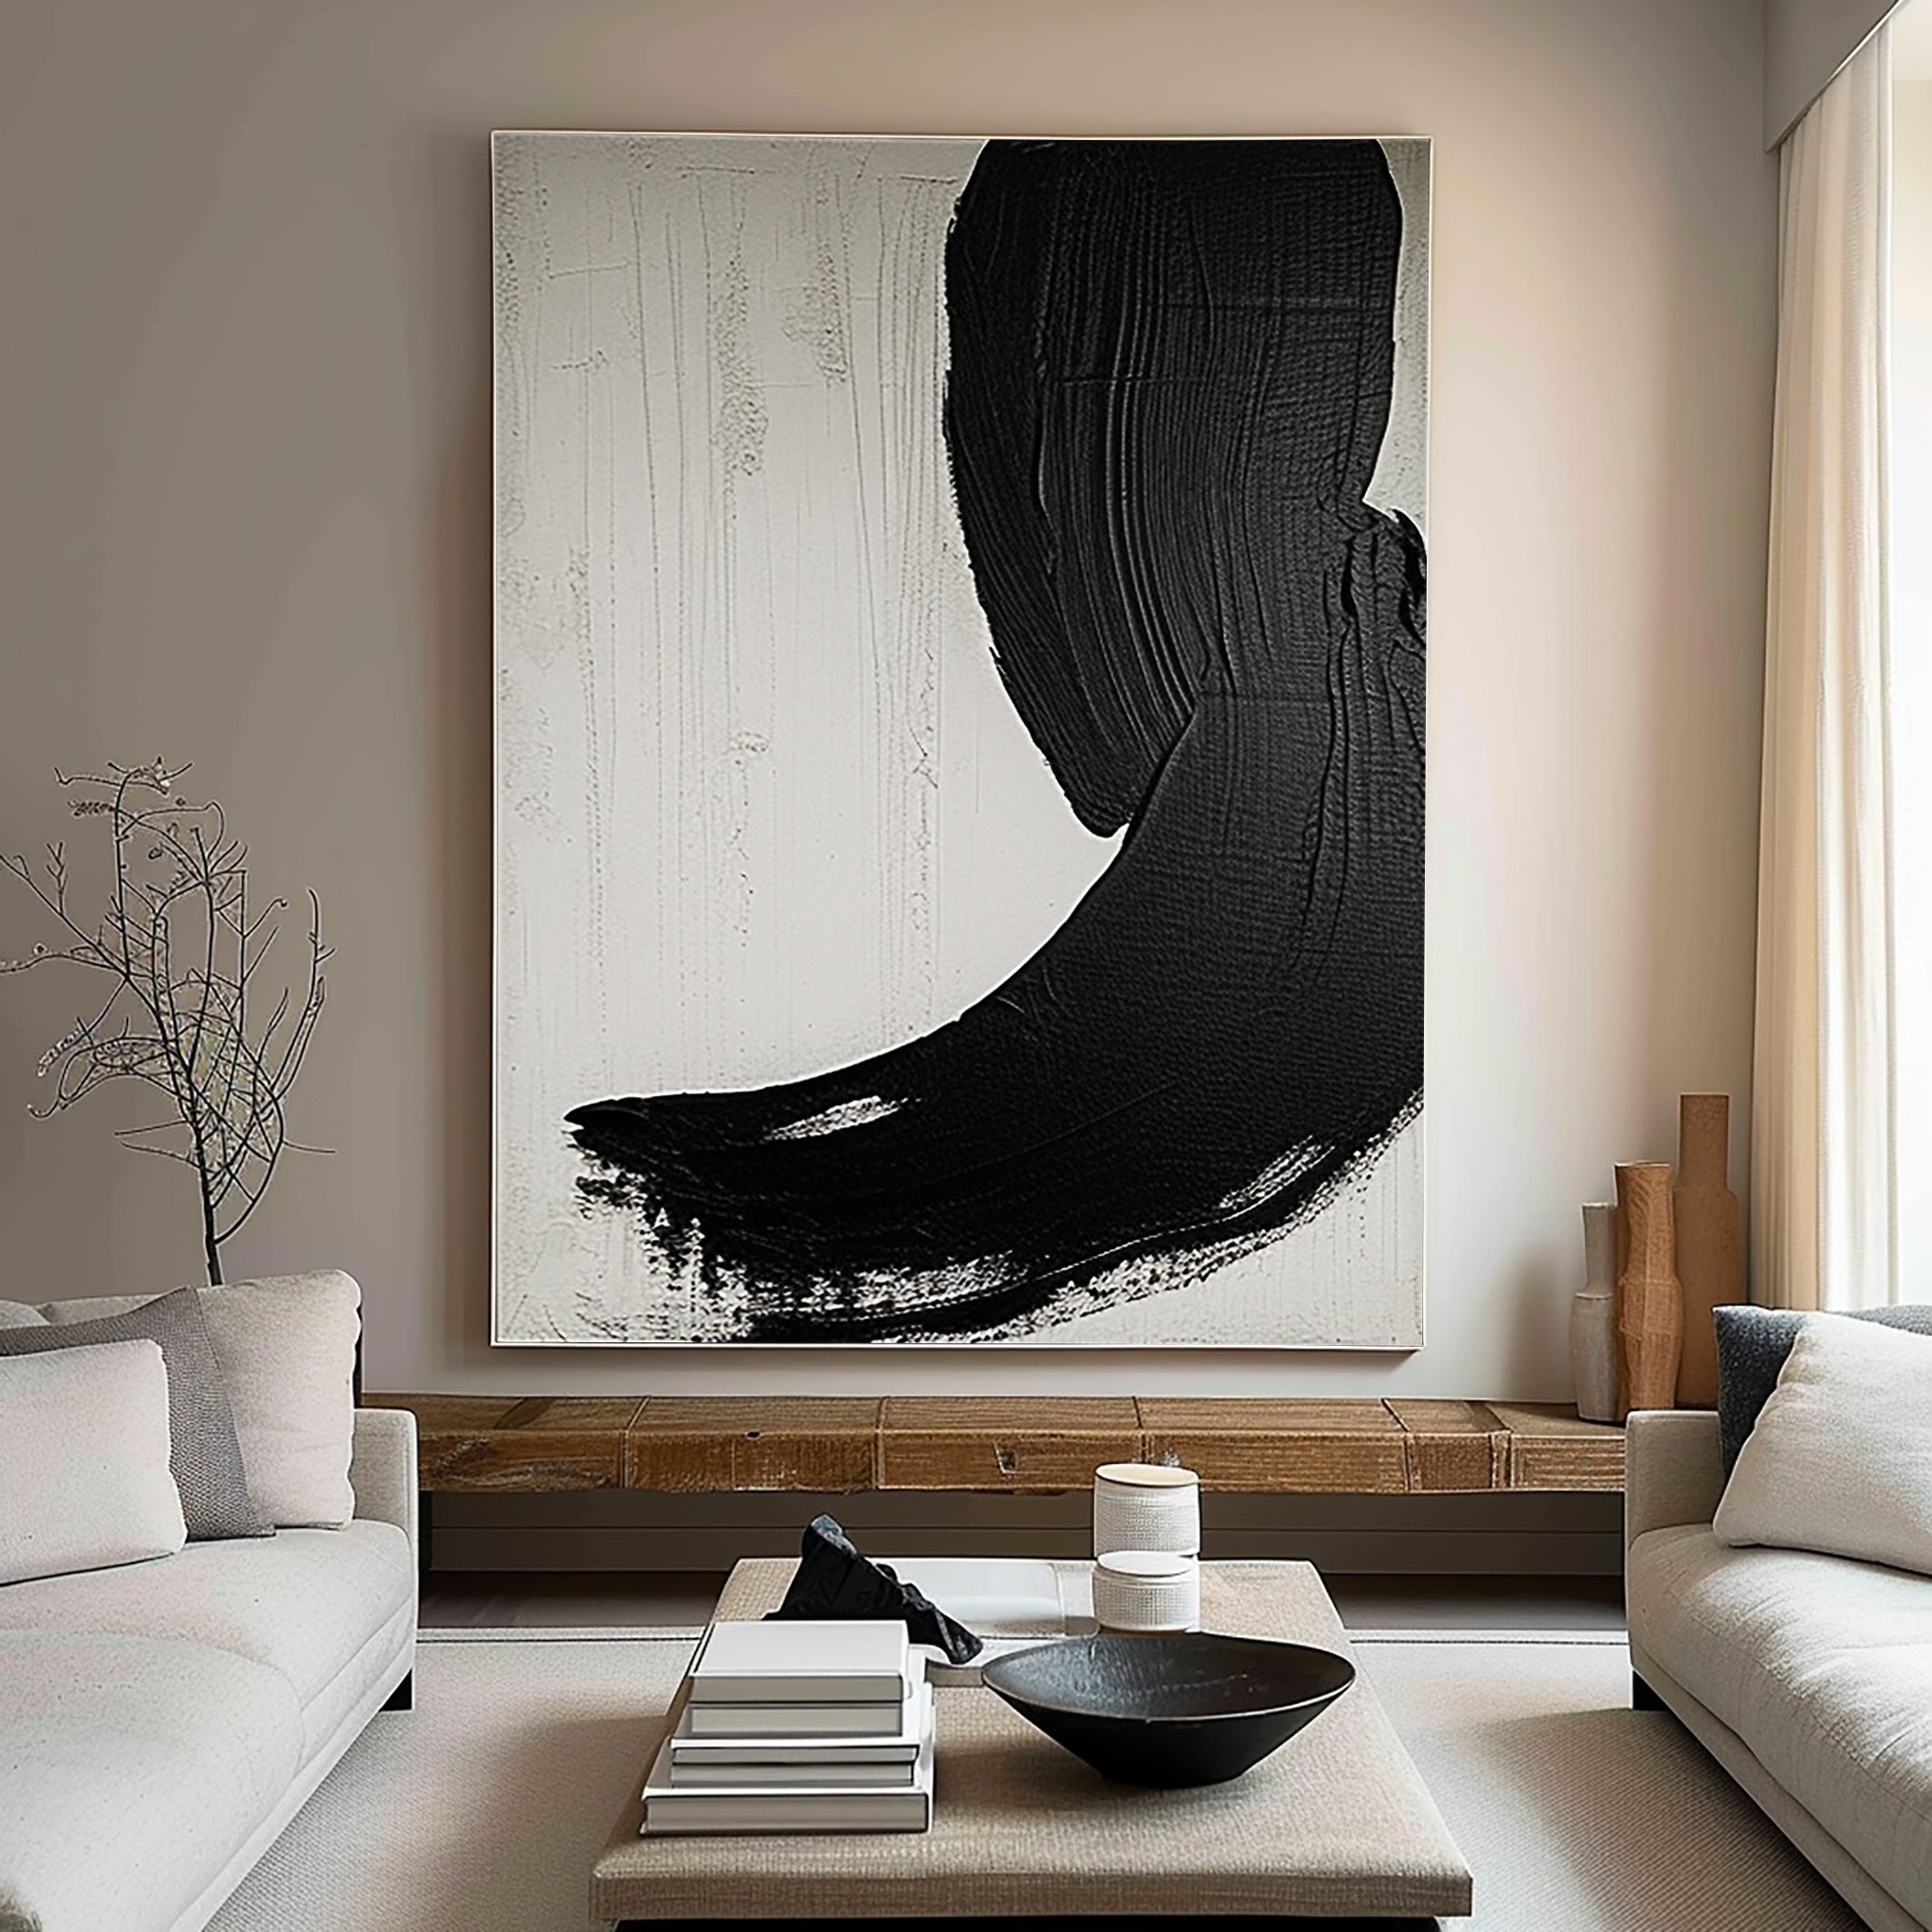 Black & White Abstract Painting #BWA 001